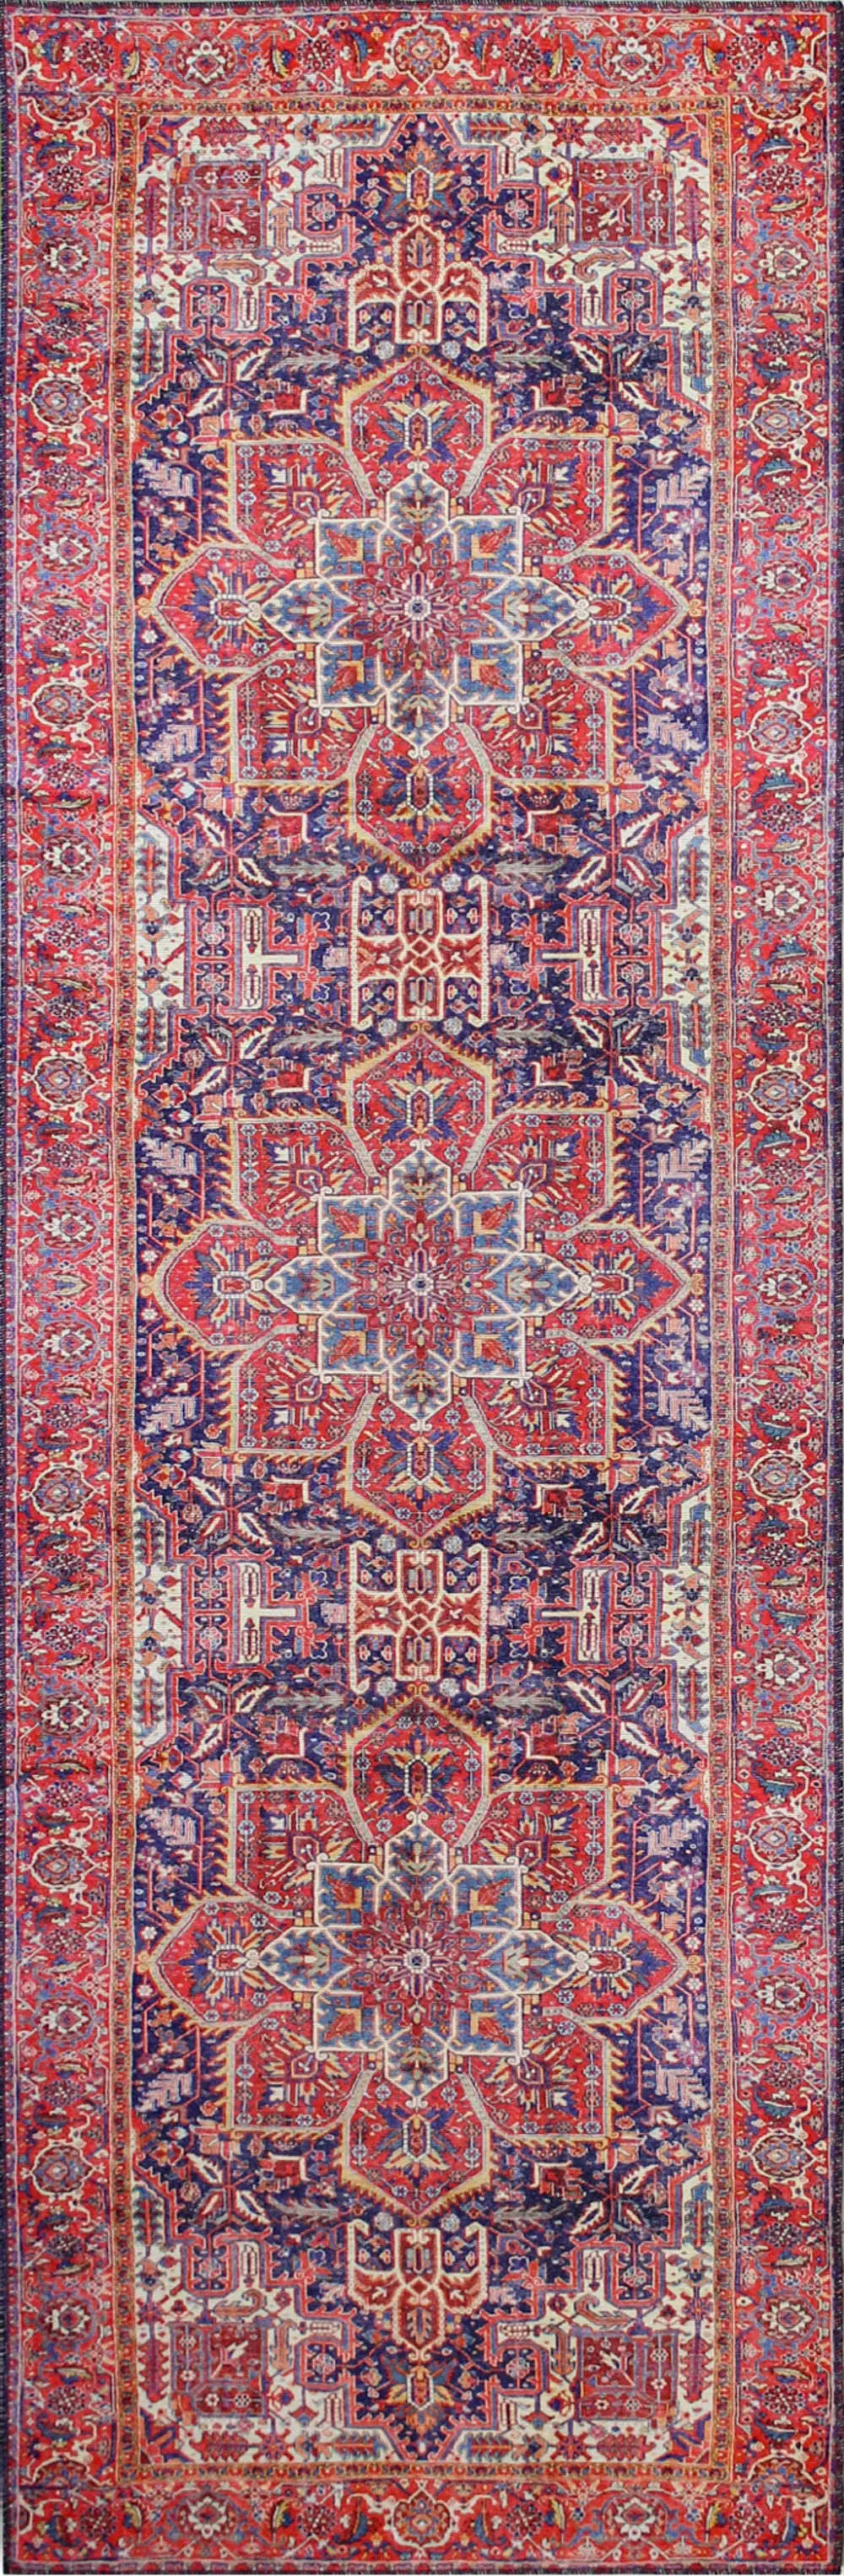 I166-DKBL-2.6X8-NR10 Traditional Zacharie Blue and Red 8 Foot Runner Rug - Impressions-1